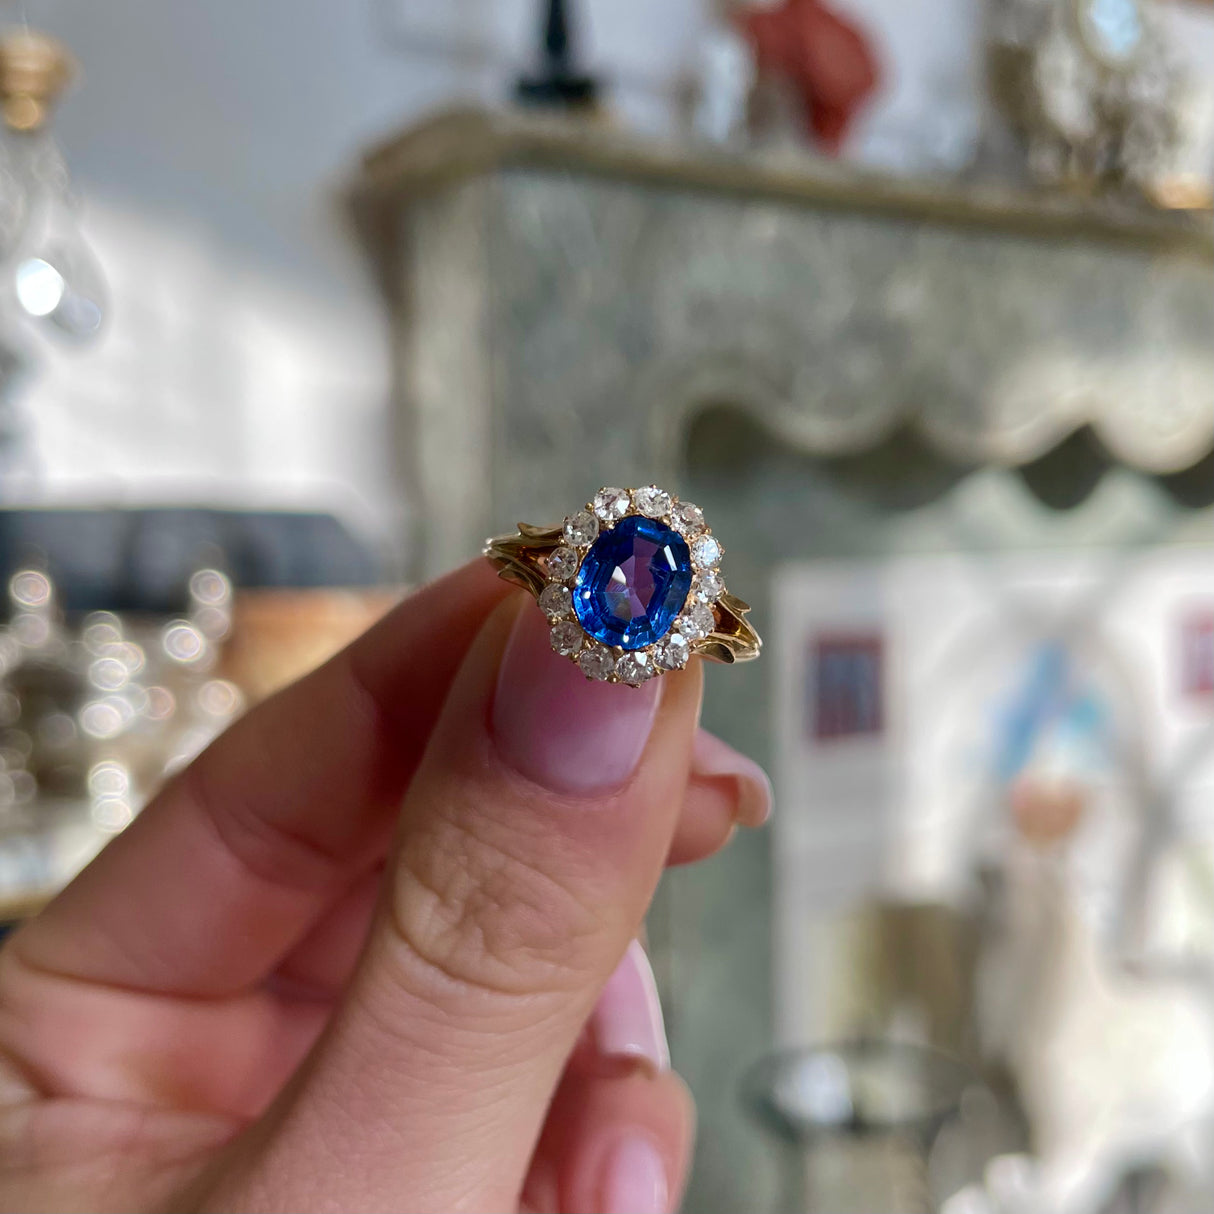 Victorian, sapphire and diamond cluster engagement ring, held in fingers.